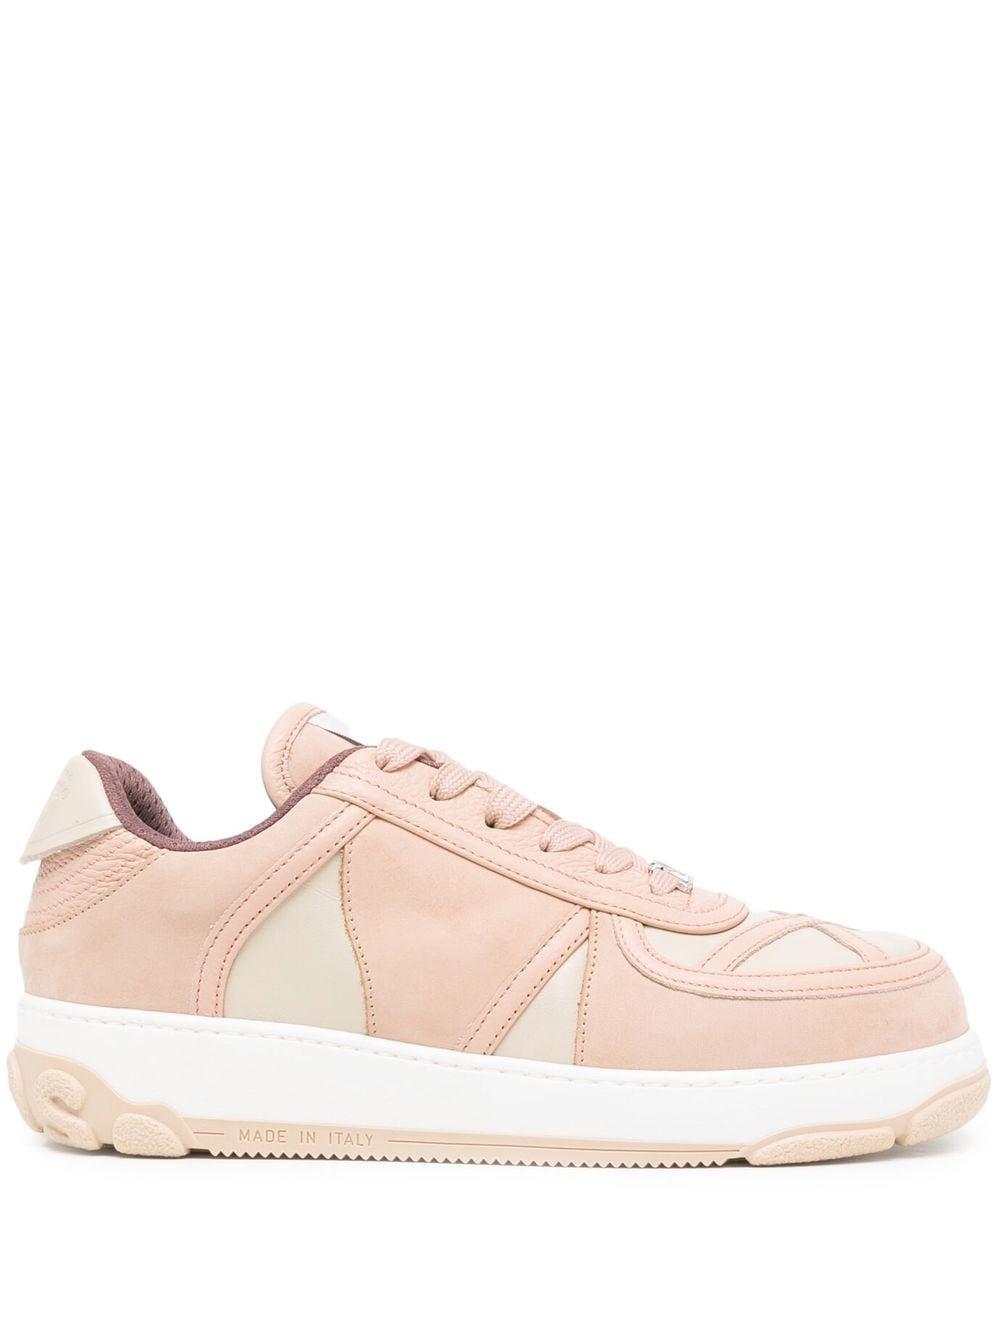 Gcds Nami Panelled Low-top Sneakers in Pink | Lyst